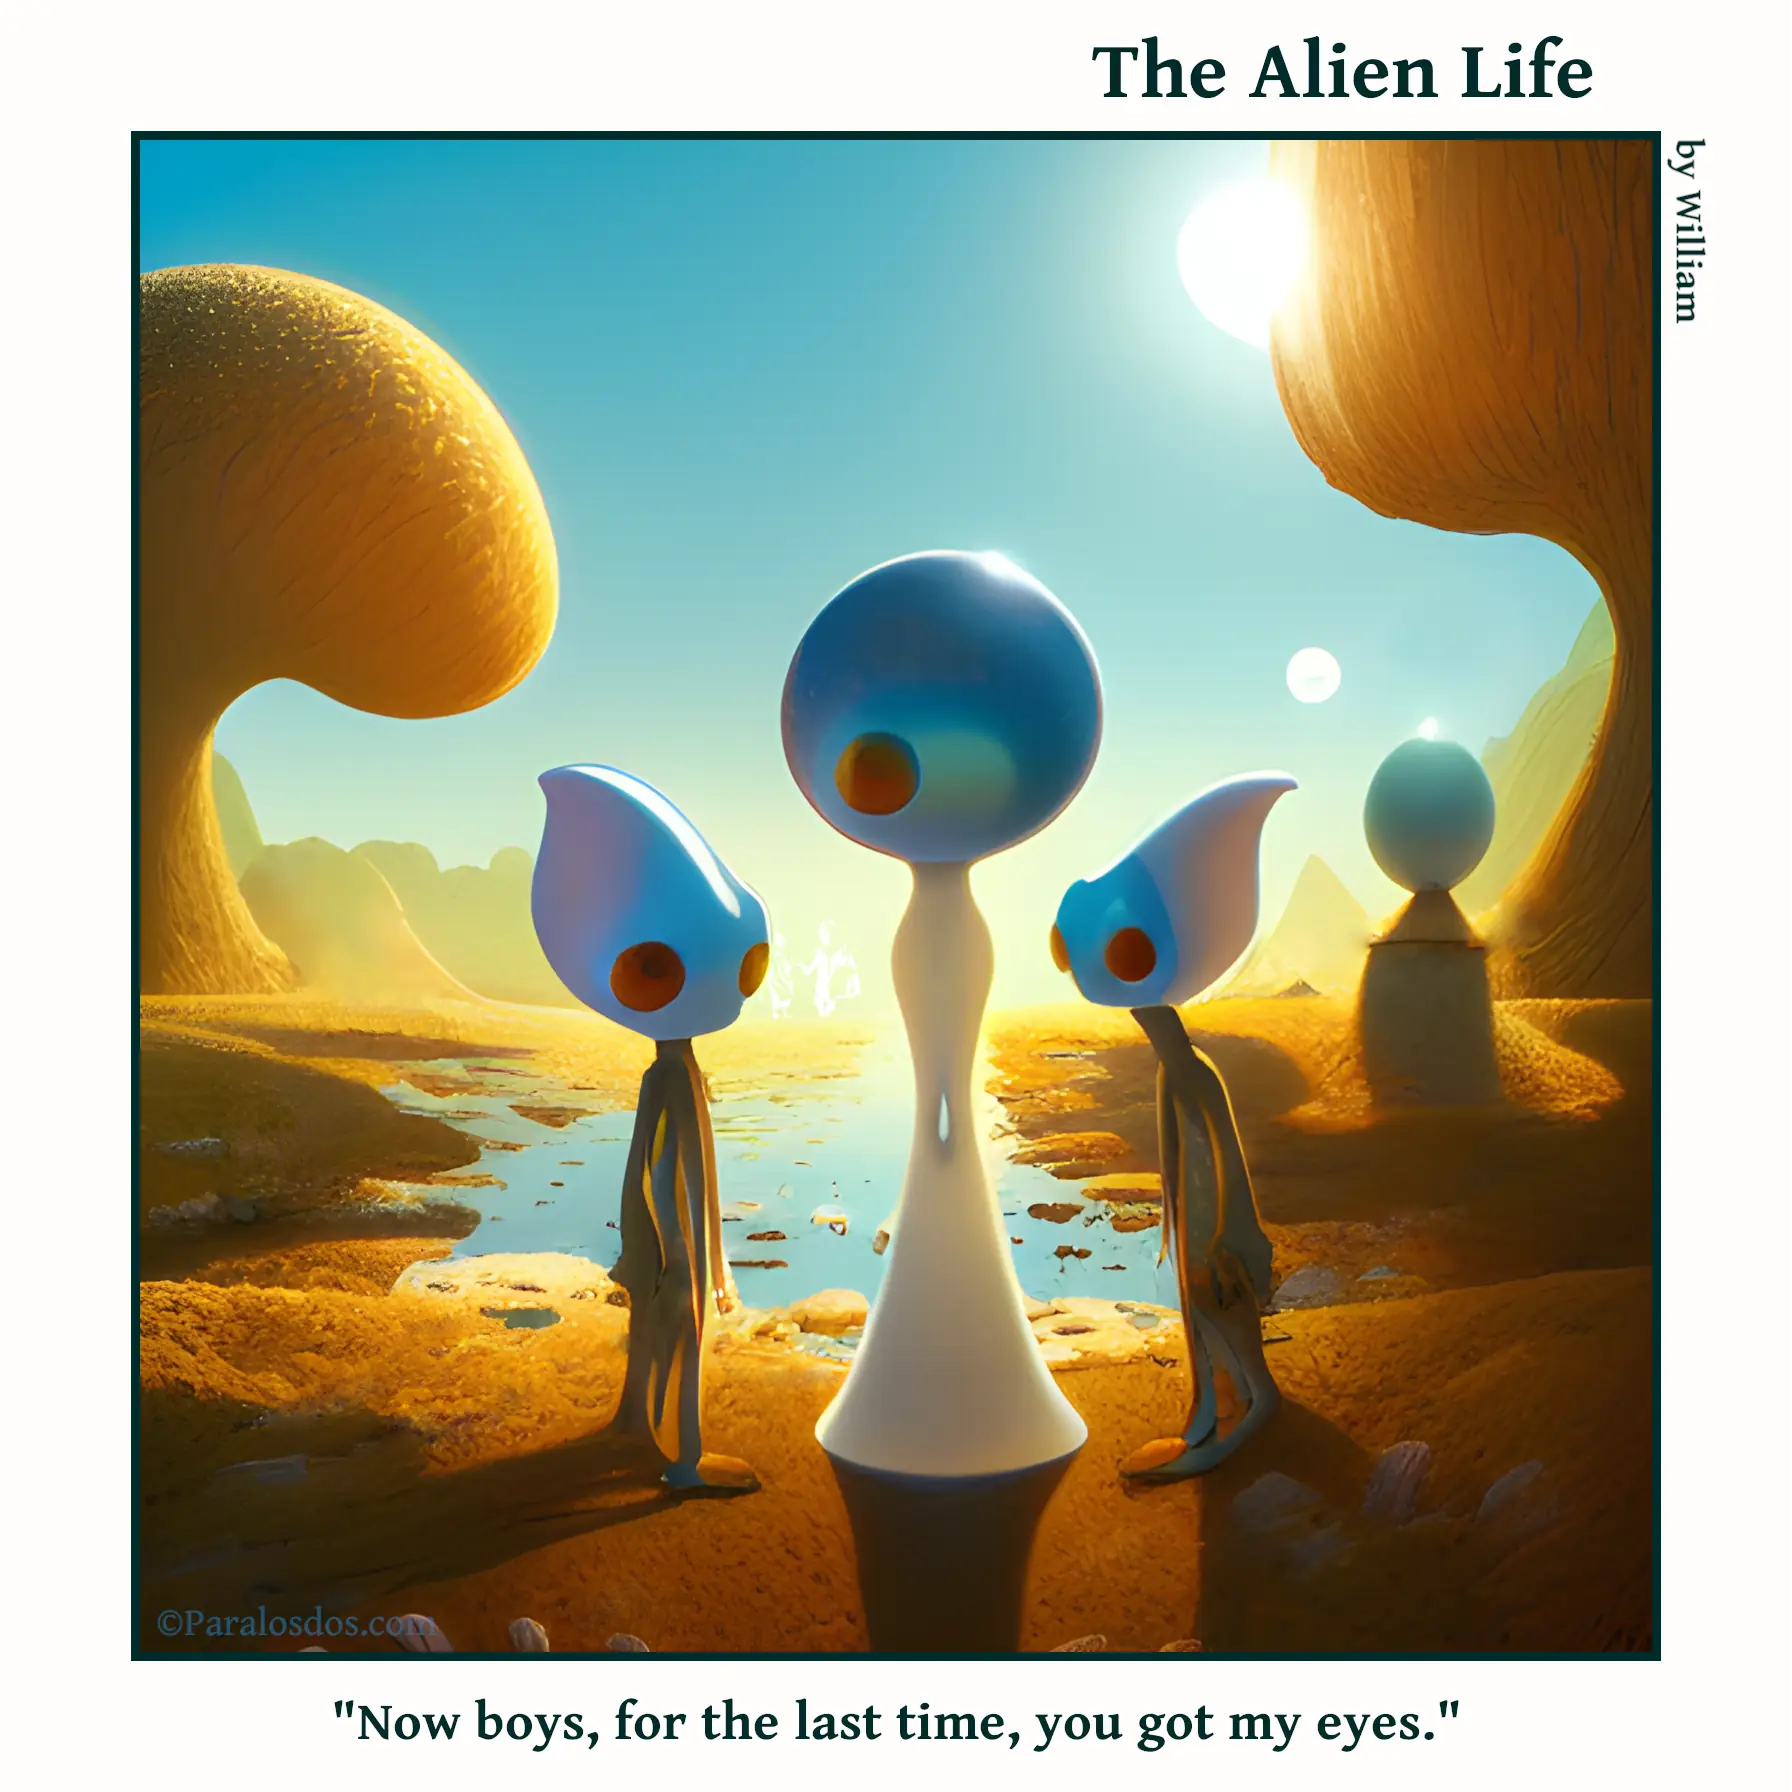 The Alien Life, one panel Comic. Two alien kids are standing on either side of their mother. They have different shaped heads and bodies than their mother. The caption reads: "Now boys, for the last time, you got my eyes."